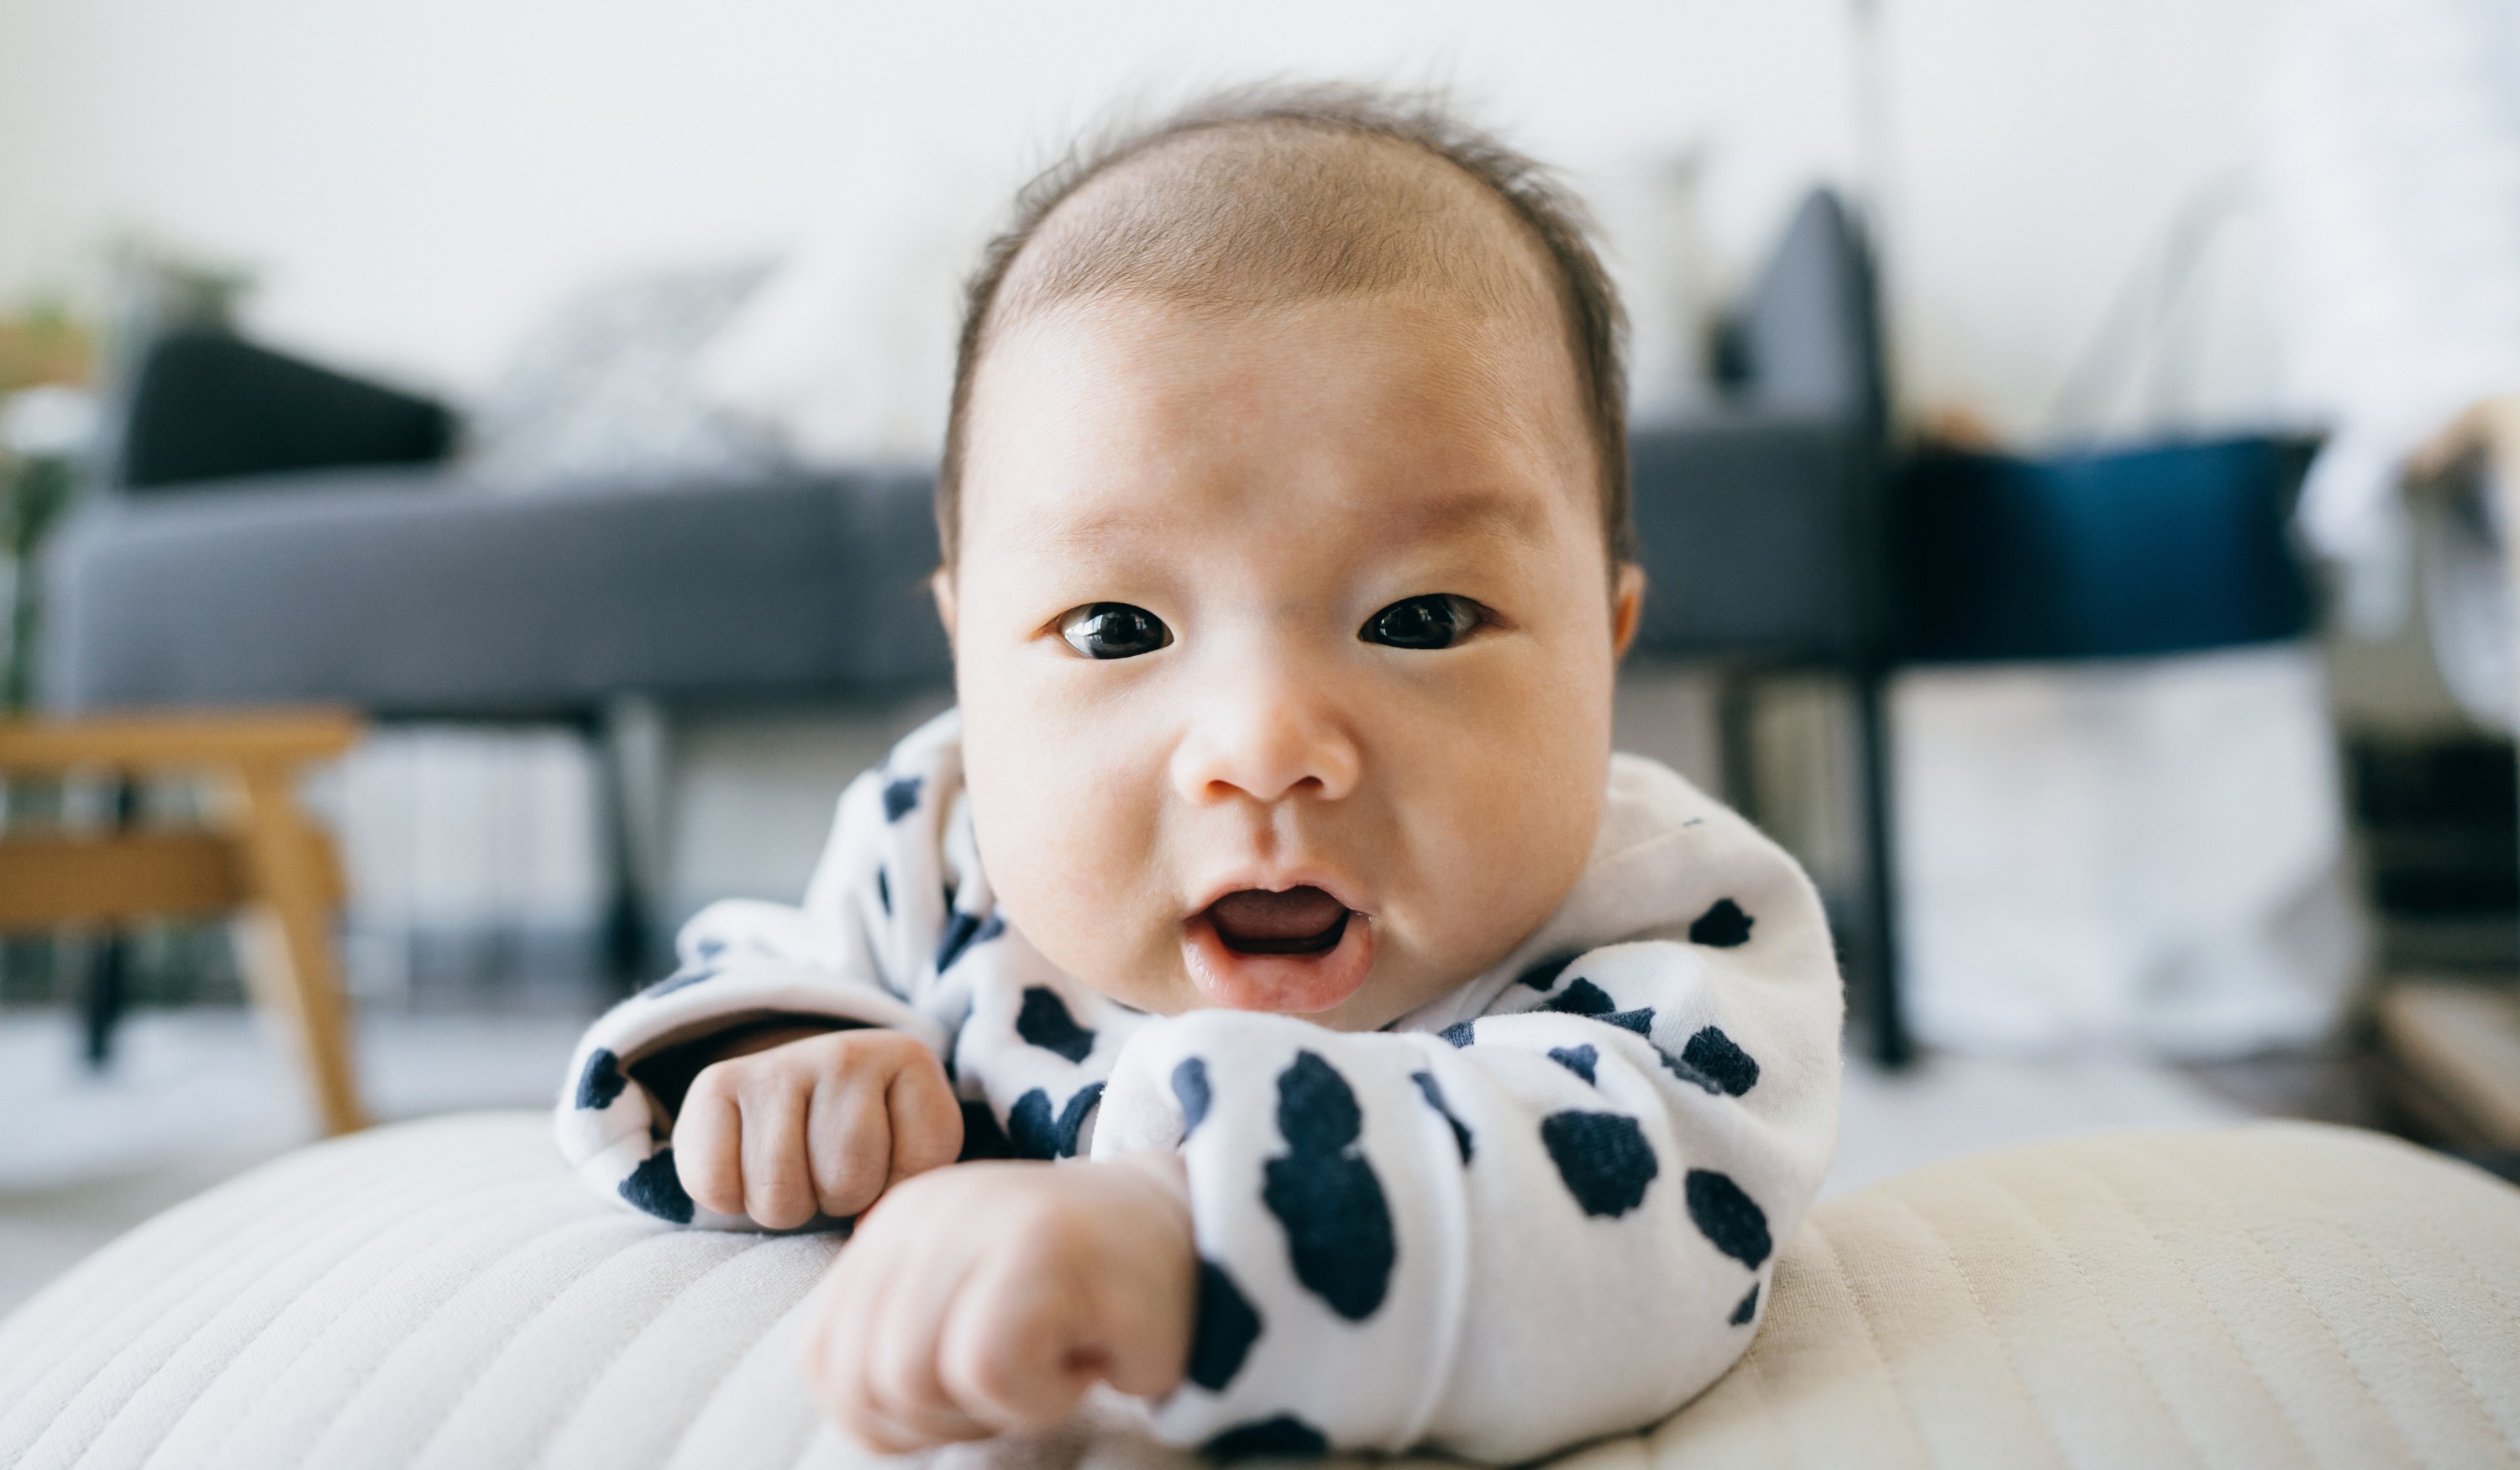 Tummy time, reading among recommended activities that boost babies